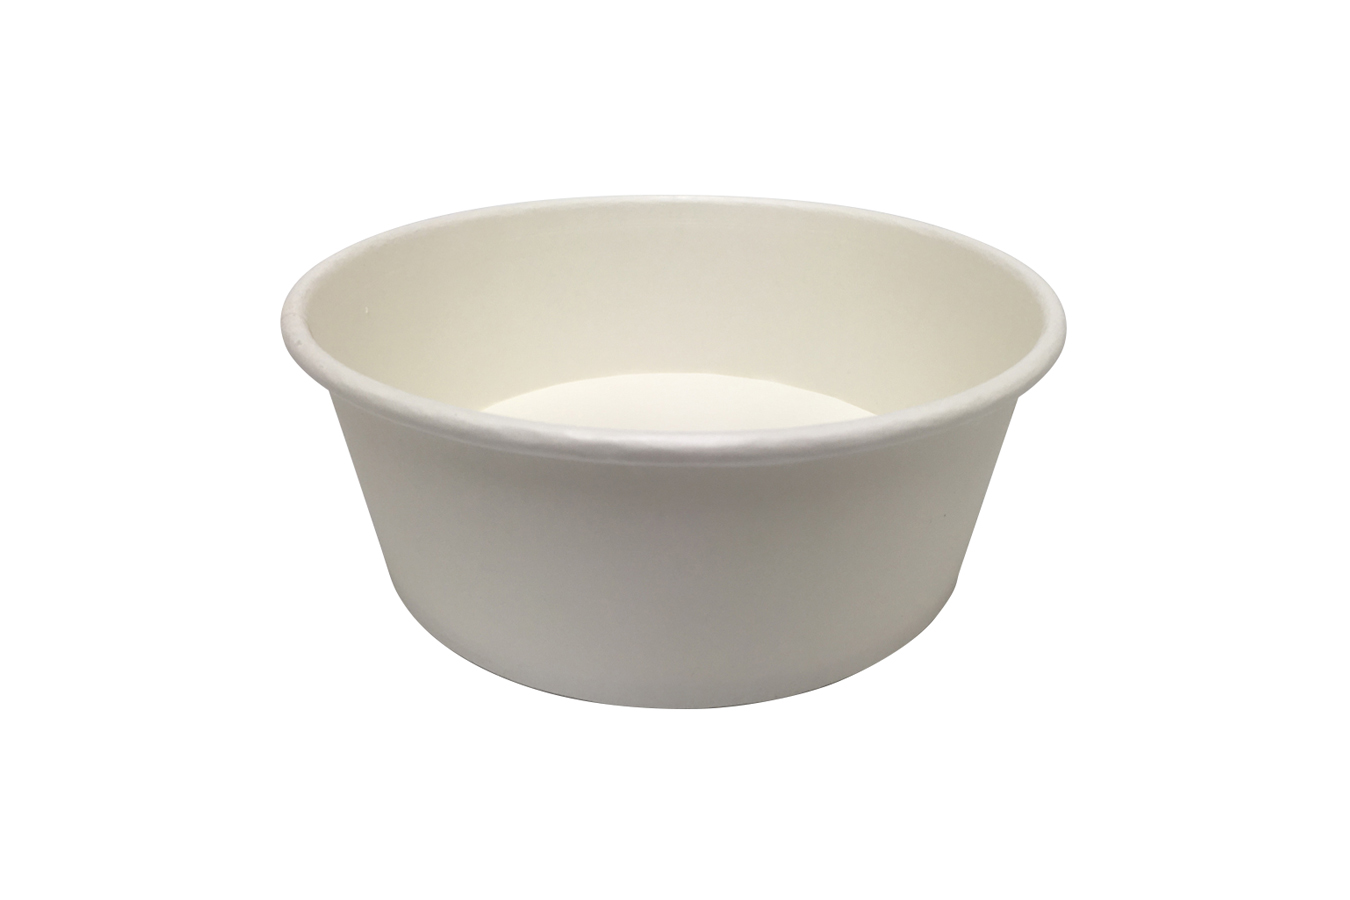 Premium takeout container white color 24 oz size Athena paper bowl by Ecoapx Inc